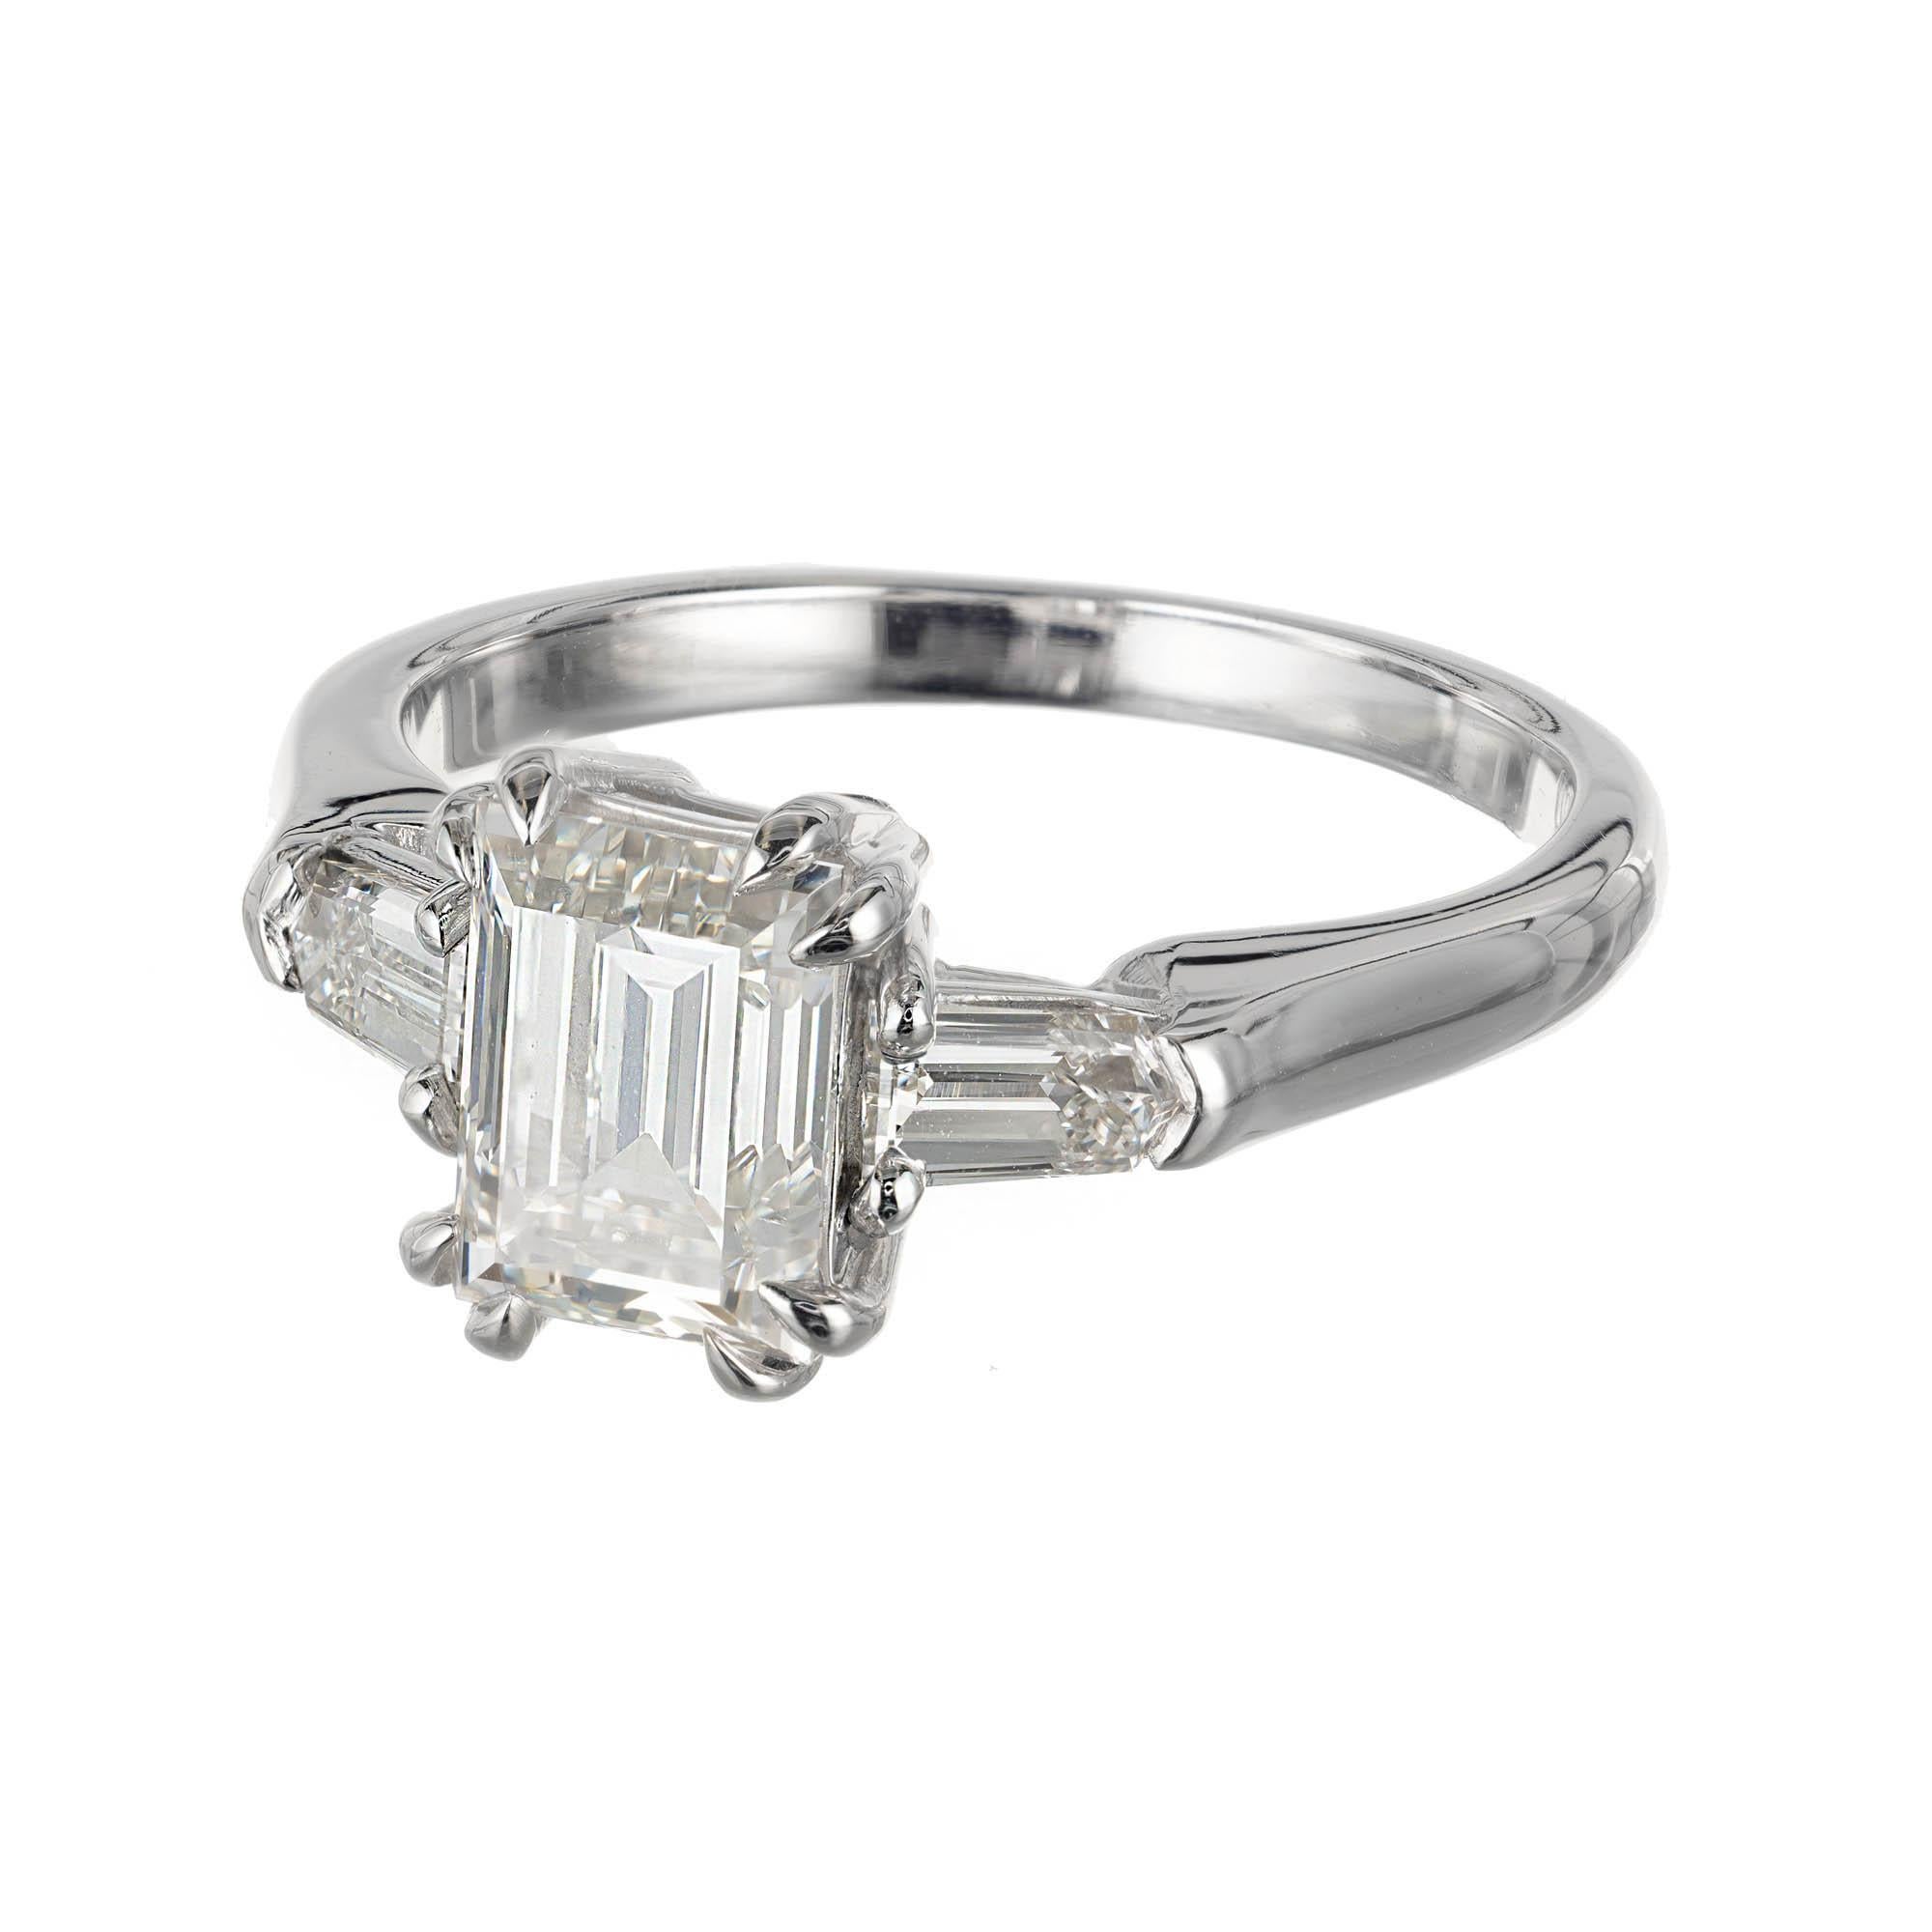 Emerald step cut sparkly diamond three-stone engagement ring. Emerald cut center stone with two step cut side diamonds in a platinum setting designed and crafted in the Peter Suchy Workshop. GIA Certified. 

1 emerald step cut I VS diamond,